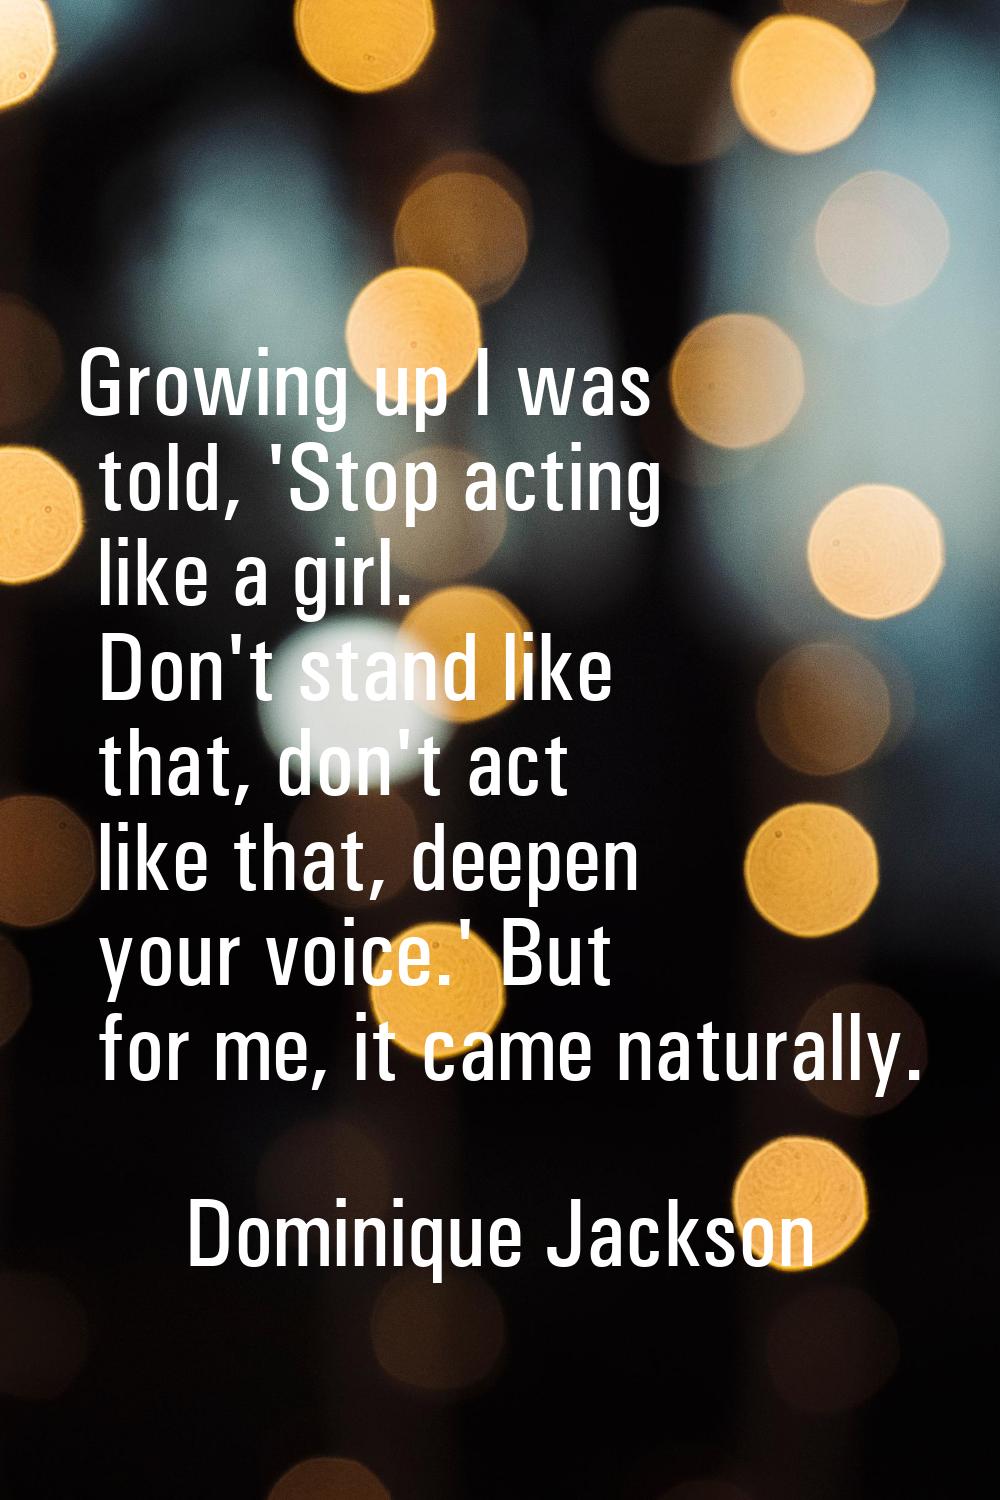 Growing up I was told, 'Stop acting like a girl. Don't stand like that, don't act like that, deepen